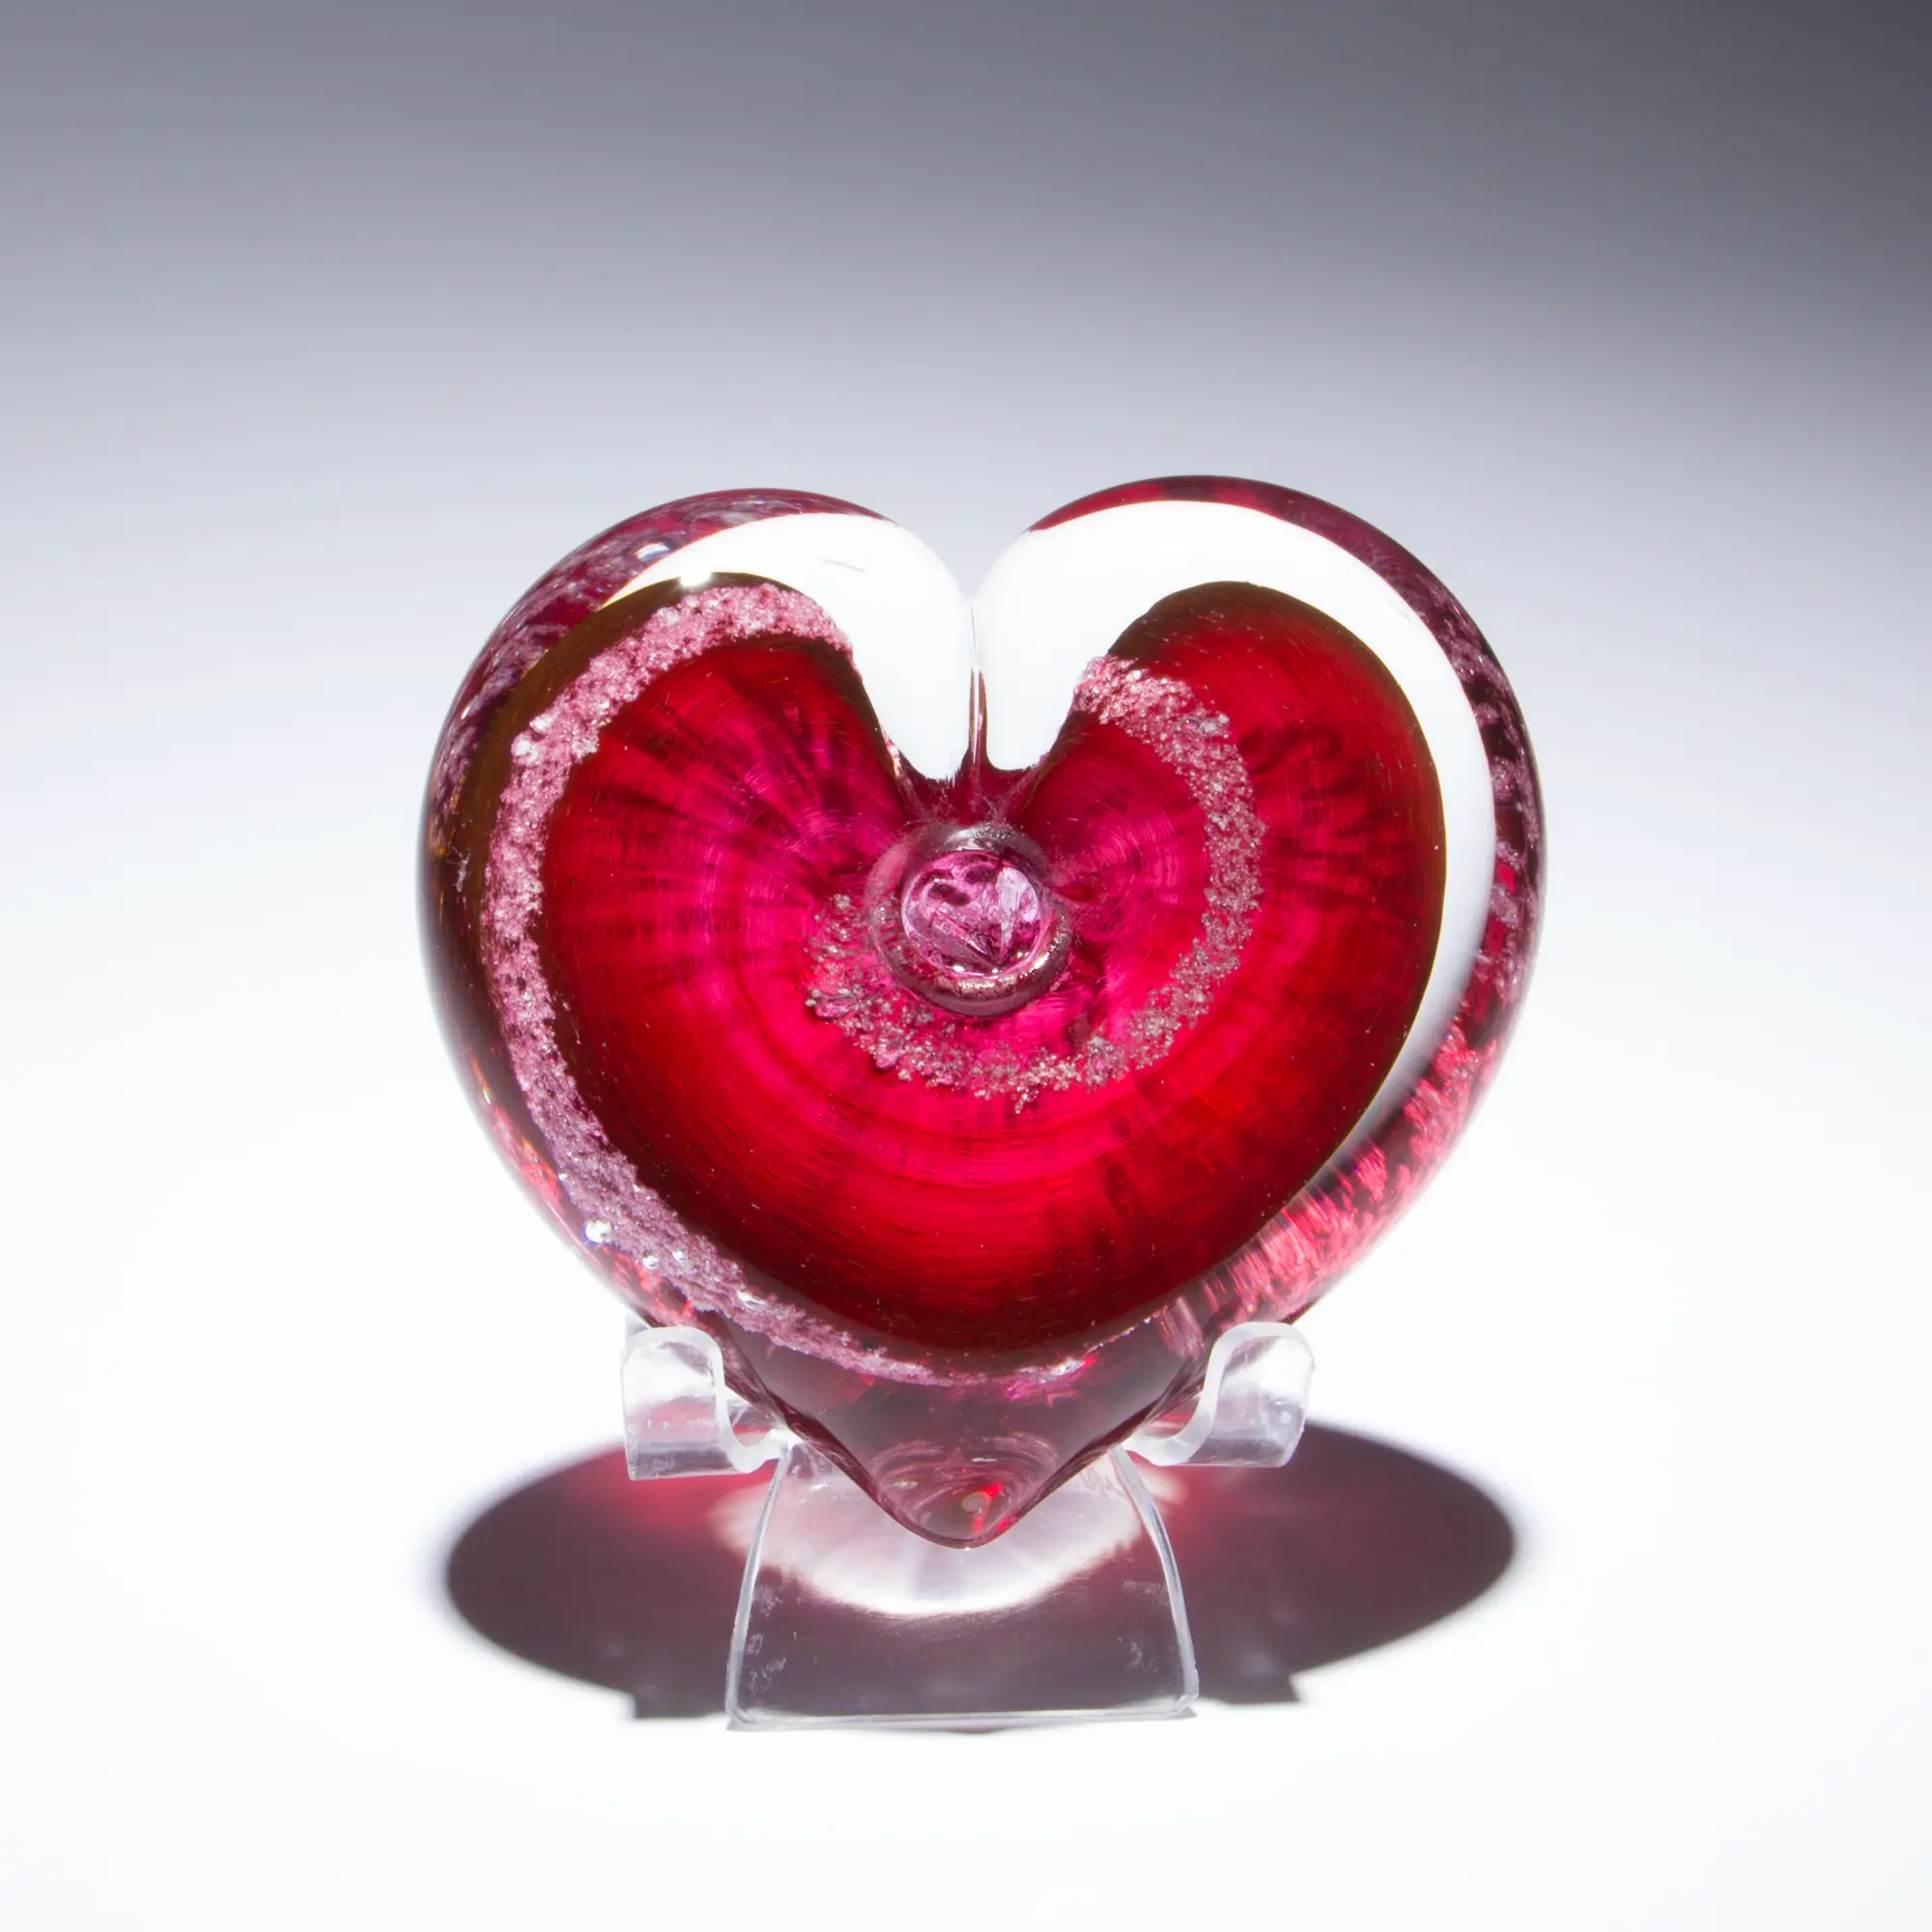 Enchanted Glass Heart Paperweight, Epiphany Studios